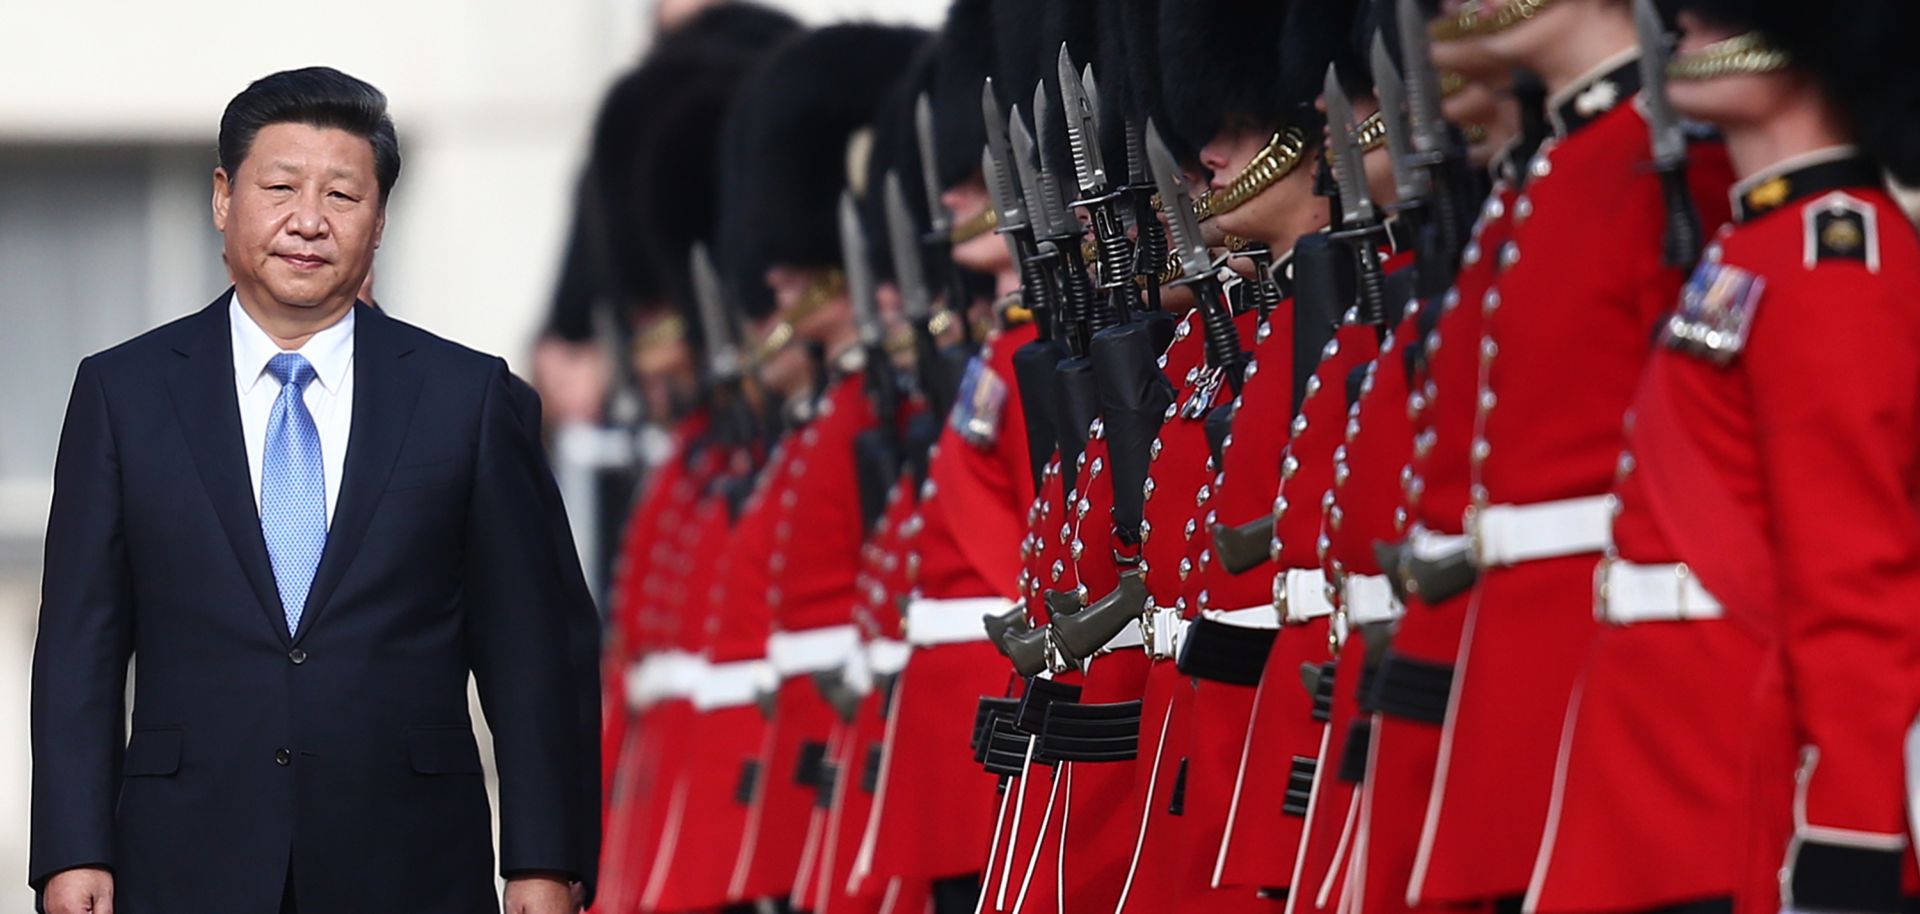 Chinese President Xi Jinping reviews an honor guard on Oct. 20, 2015, in London.